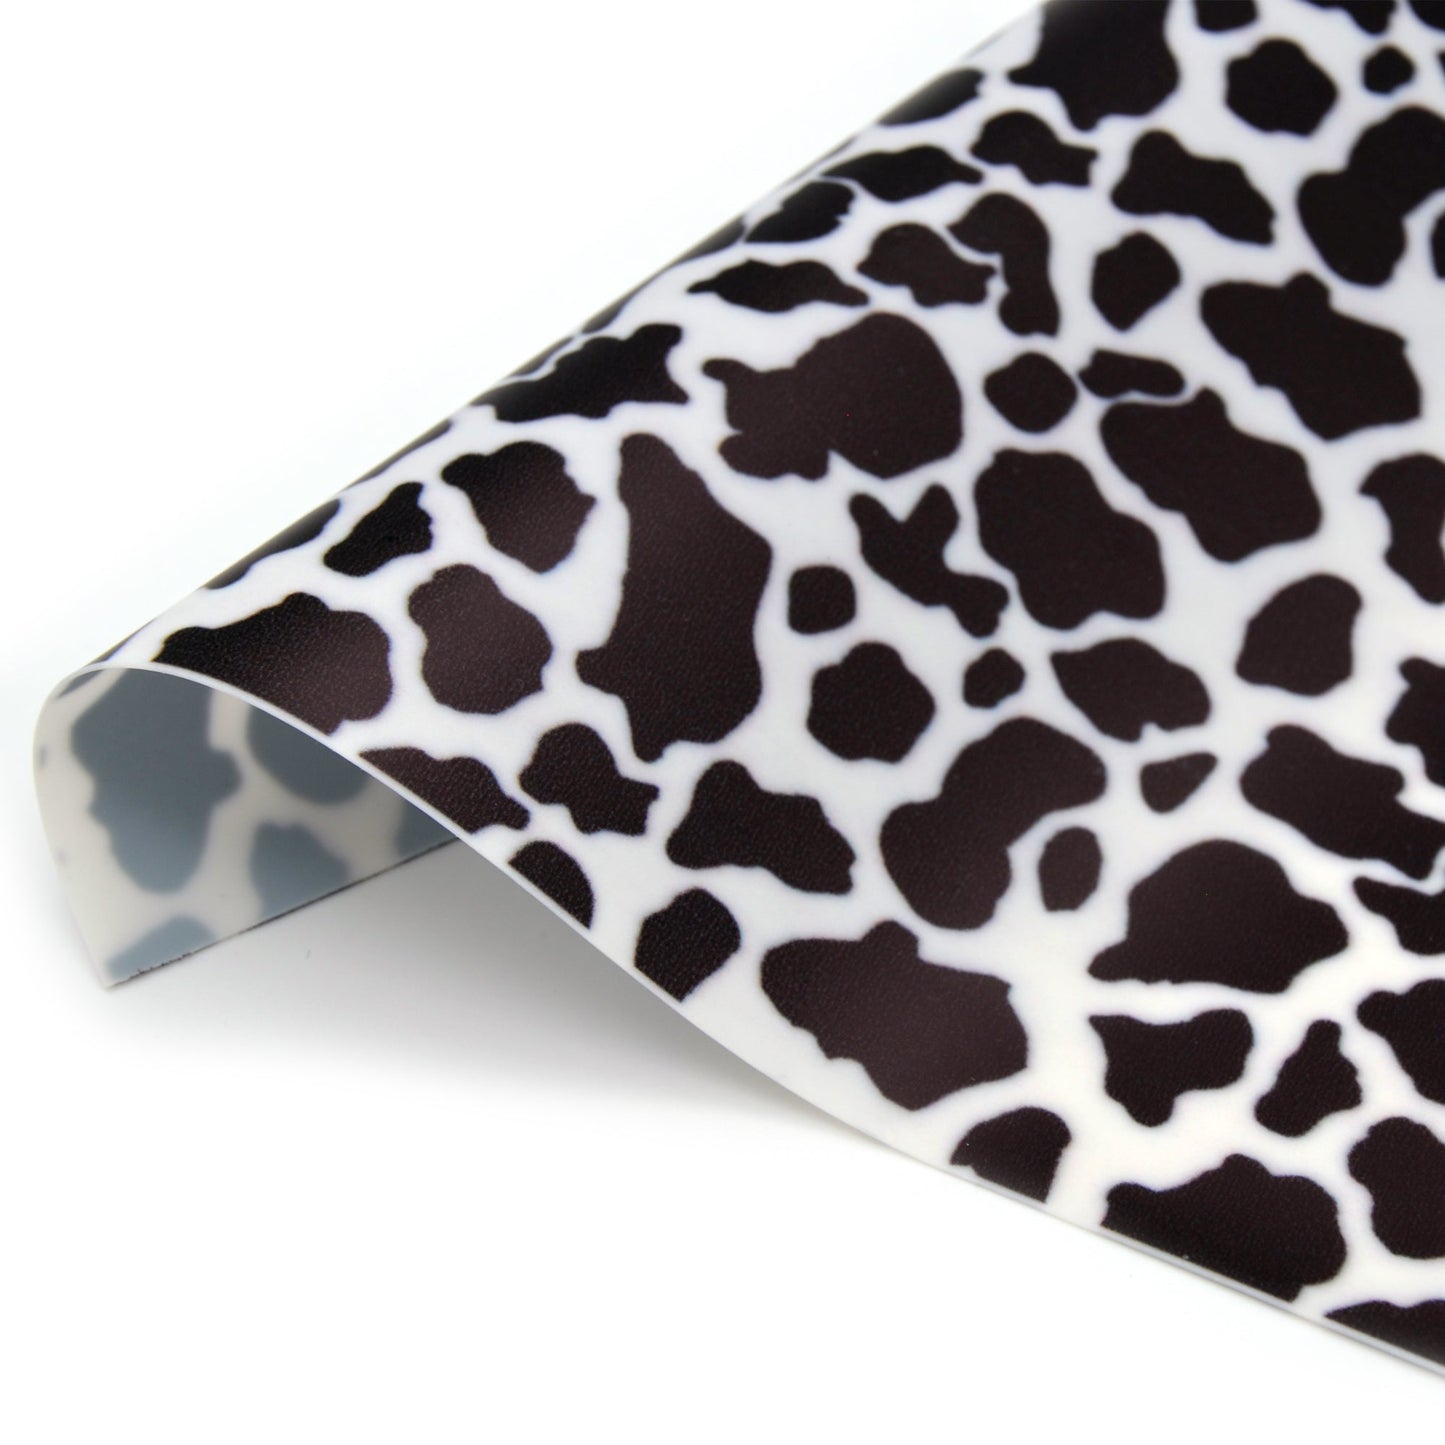 Jelly Cow Print 3 PACK 8x13 Inch Fabric